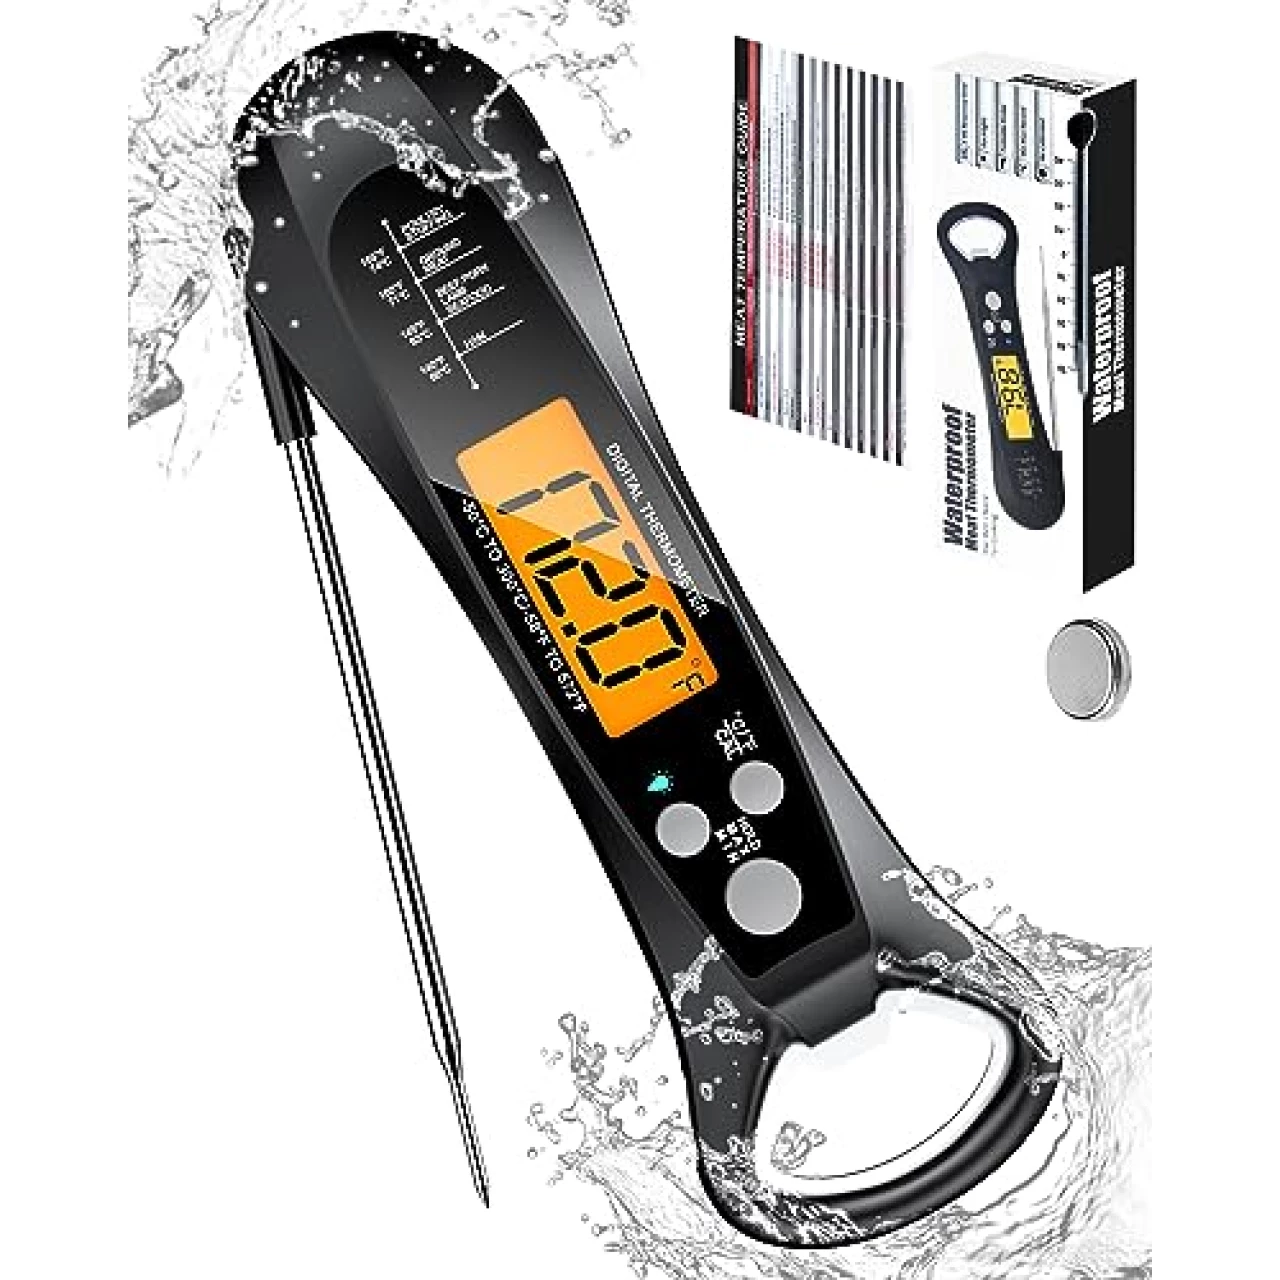 ROUUO Meat Thermometer Digital for Cooking and Grilling